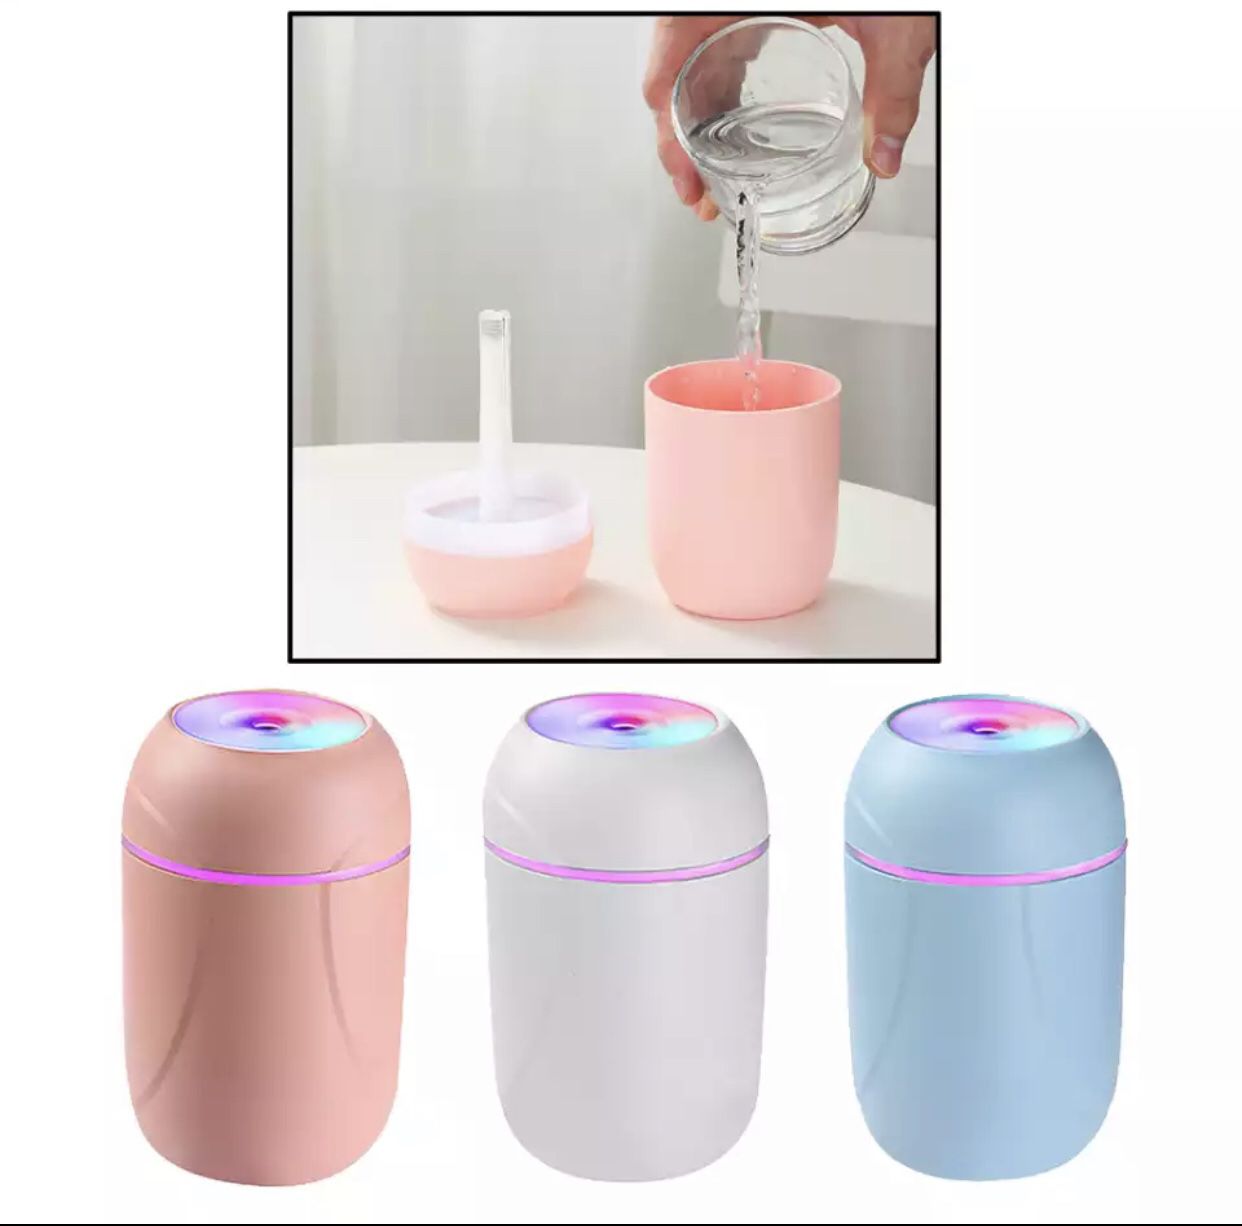 Air Humidifier Air Purifier USB Aromatherapy Diffusers 300ml Ultrasonic Humidifier Air Freshener Night Light for Travel Home